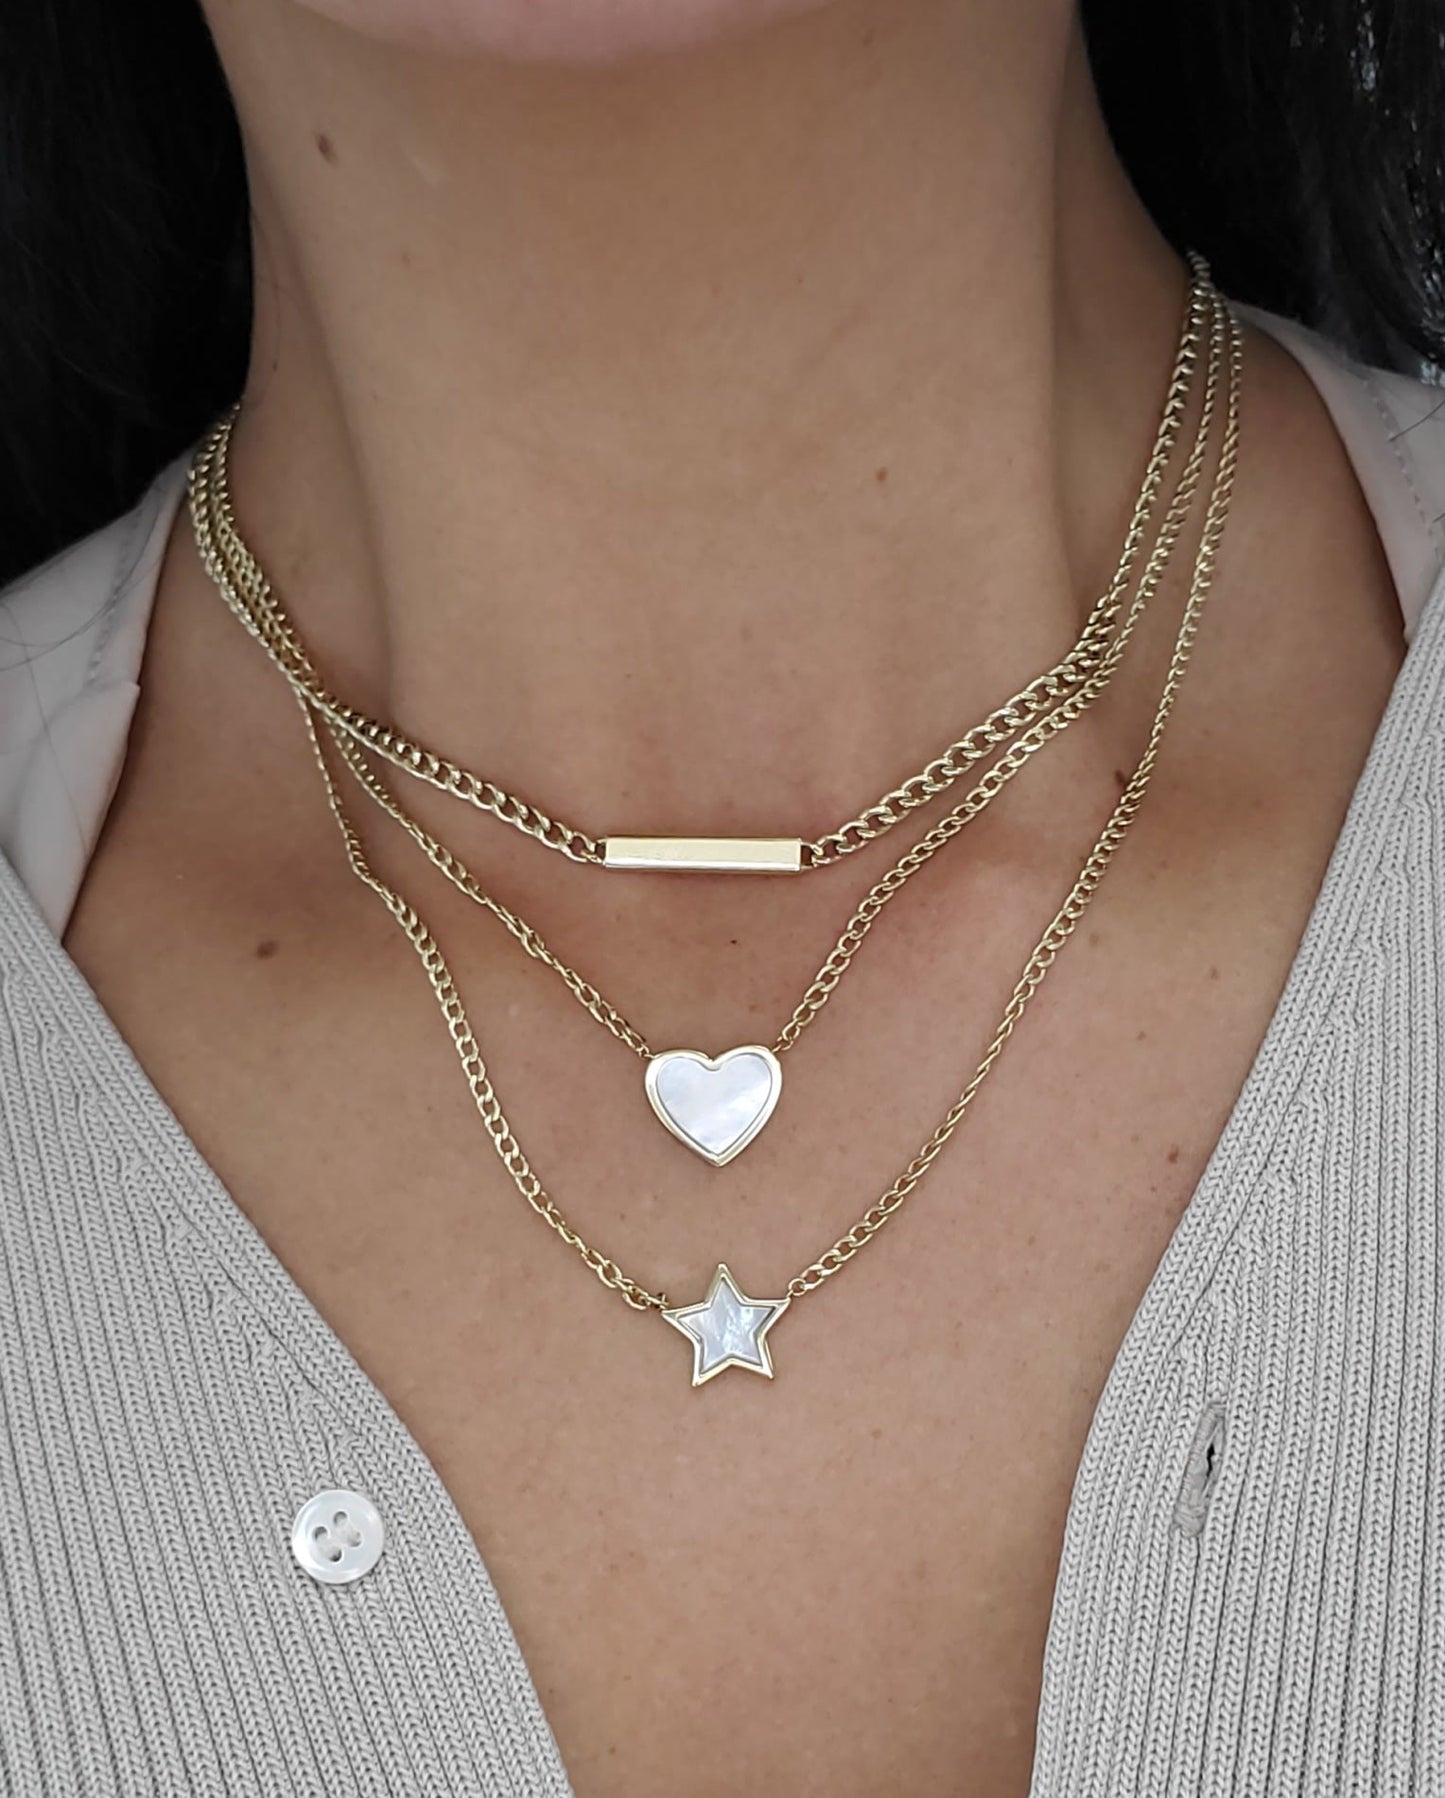 Mother of Pearl Heart Curbed Link Necklace 14K Yellow Gold